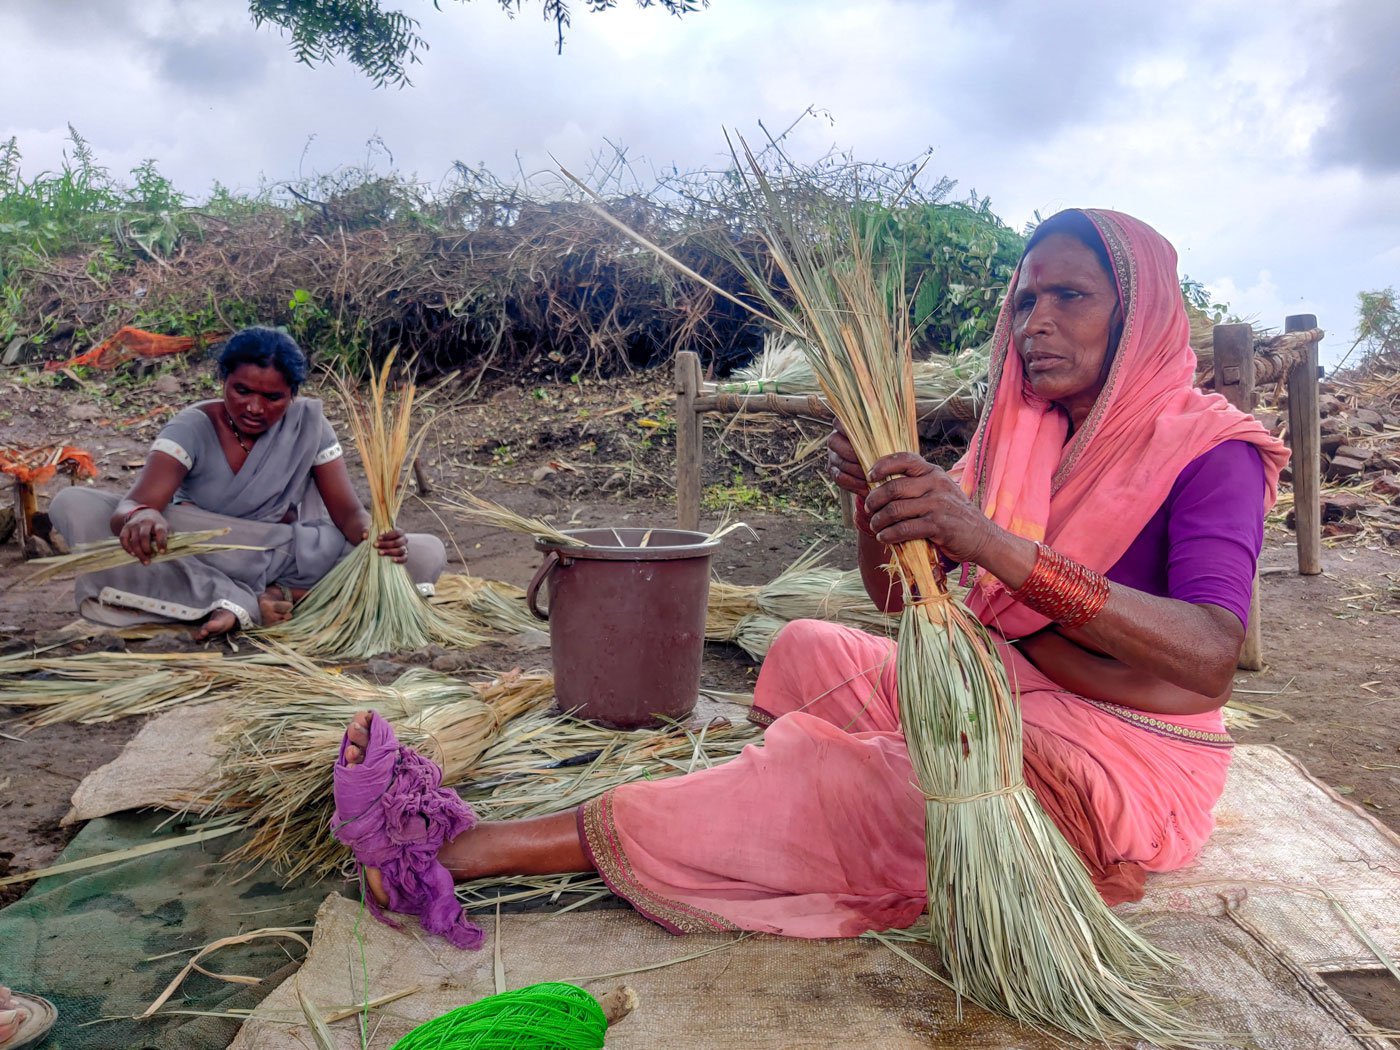 Kantabai Bhutadmal (in pink saree) binds brooms despite her weak eyesight. Her family depends on the income she earns from selling them